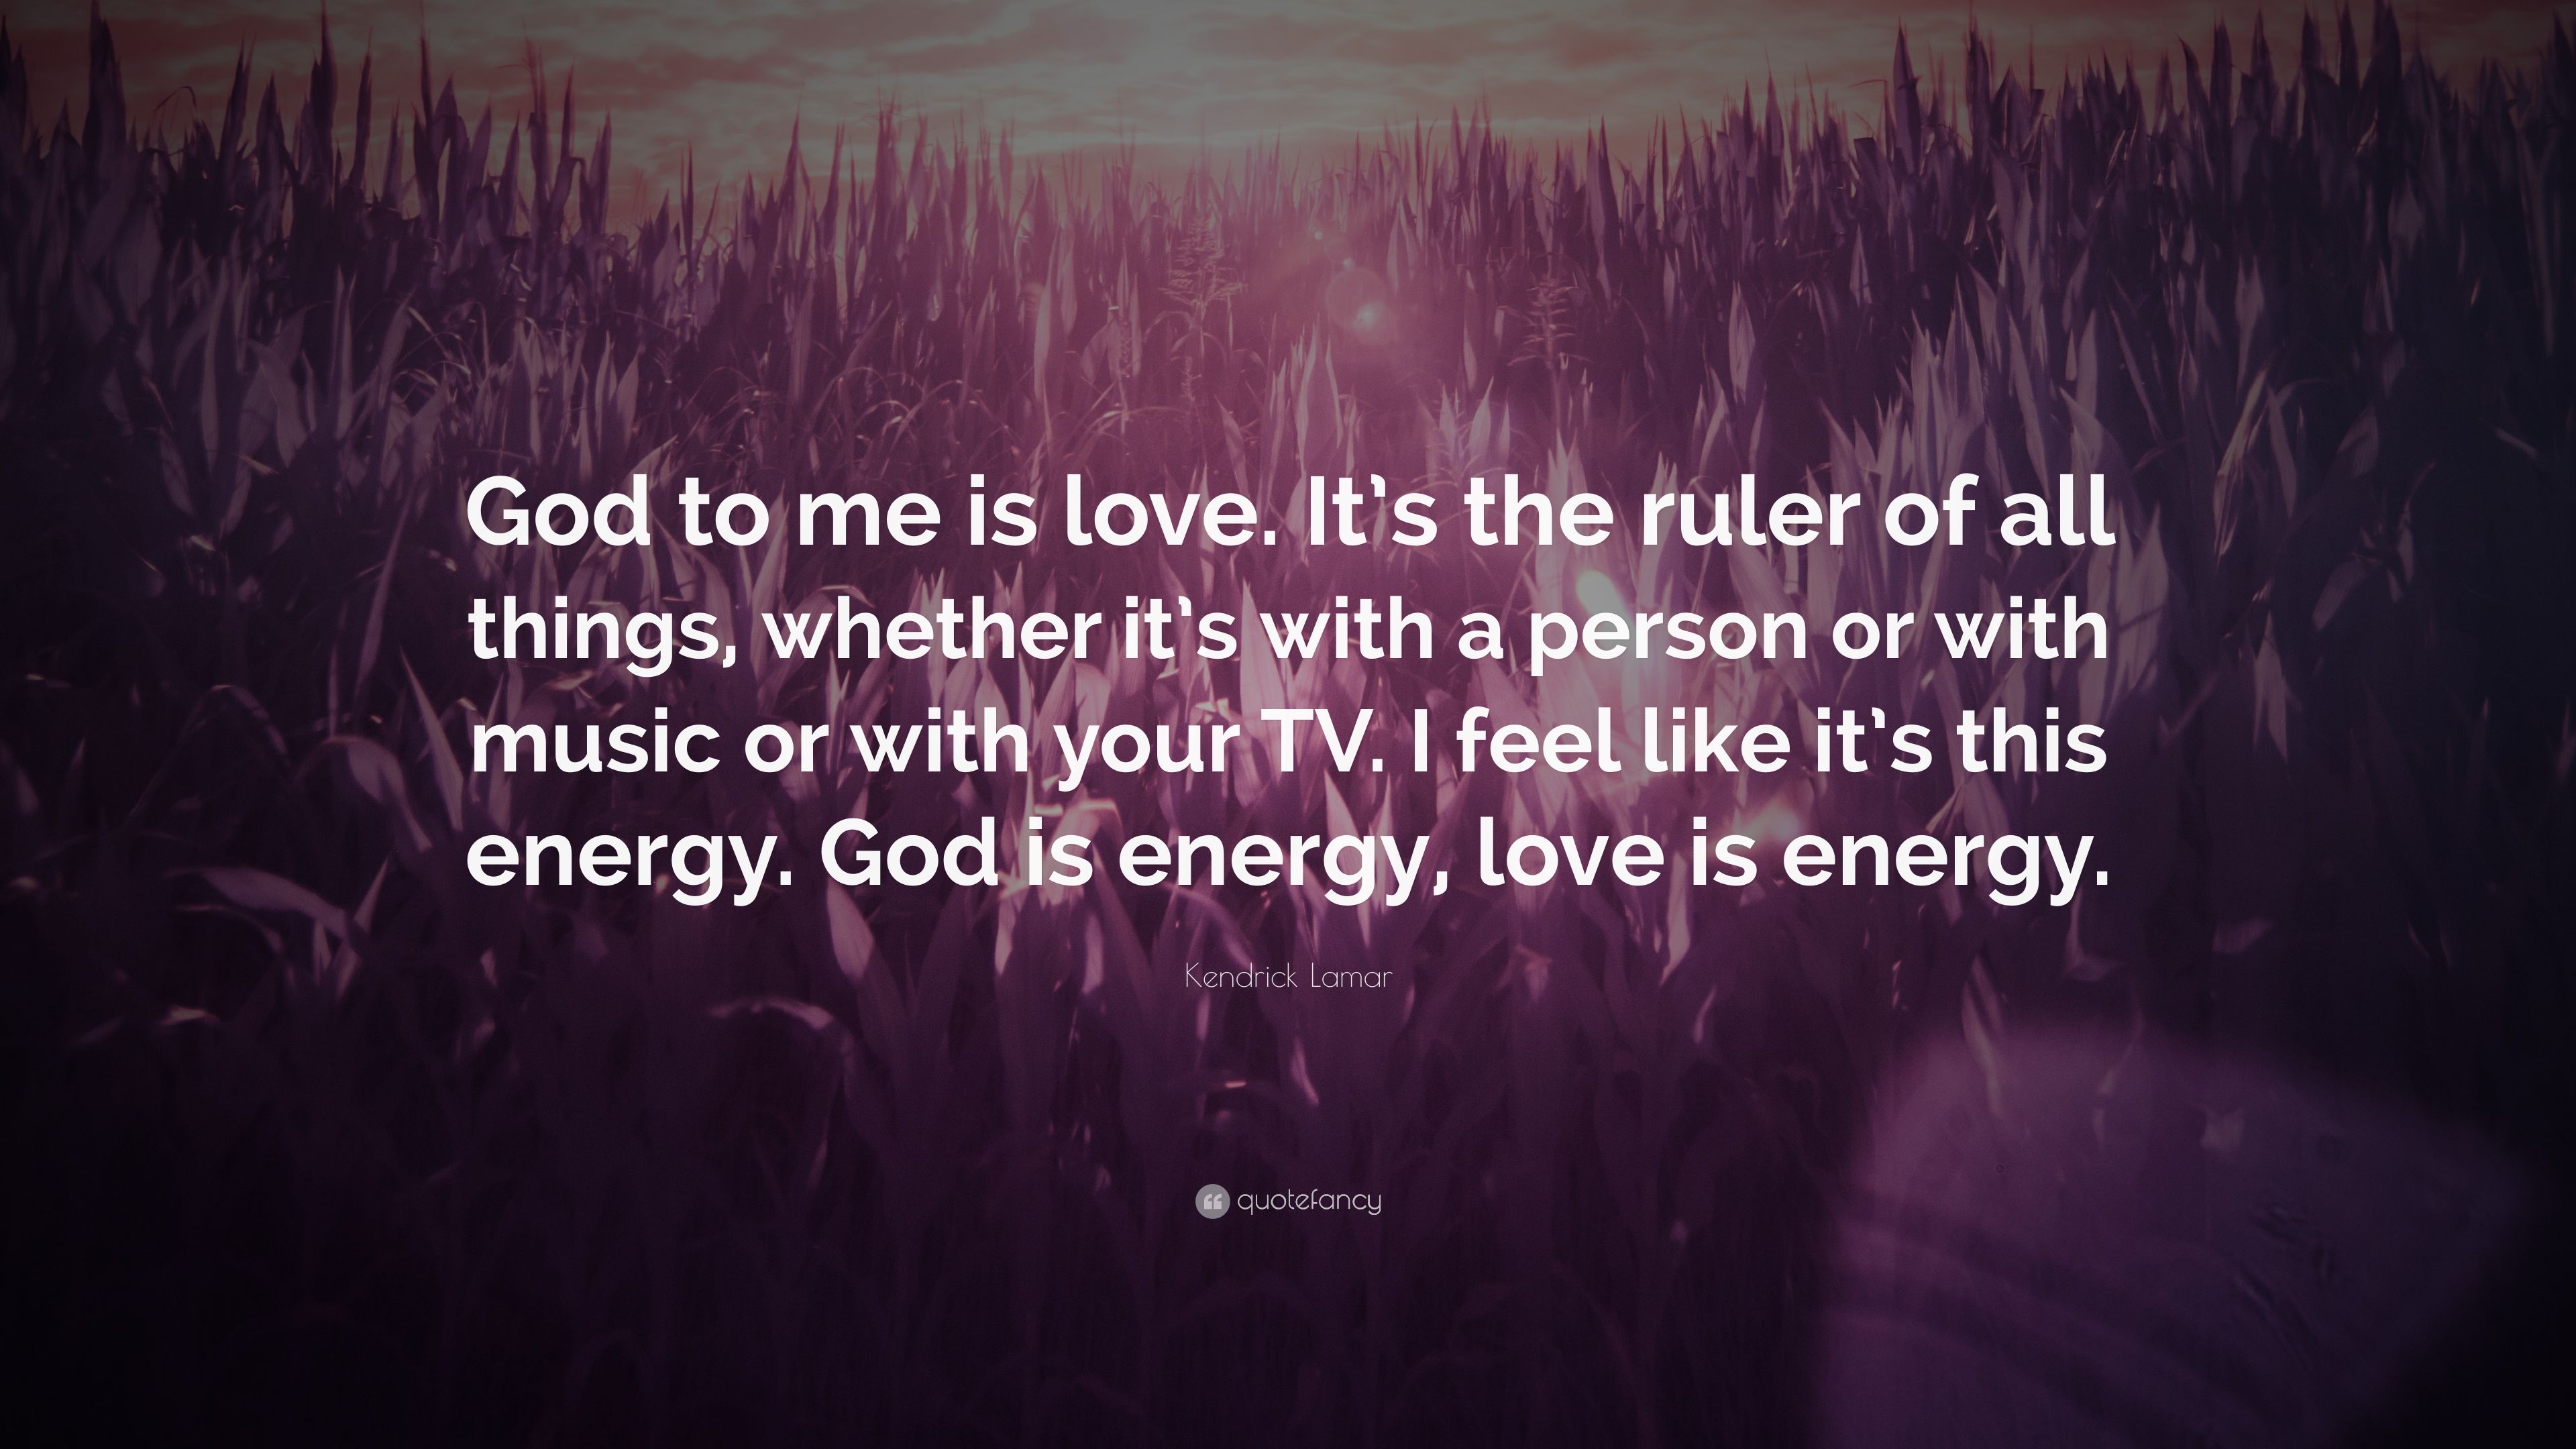 Kendrick Lamar Quote: “God to me is love. It's the ruler of all things, whether it's with a person or with music or with your TV. I feel like i.” (7 wallpaper)